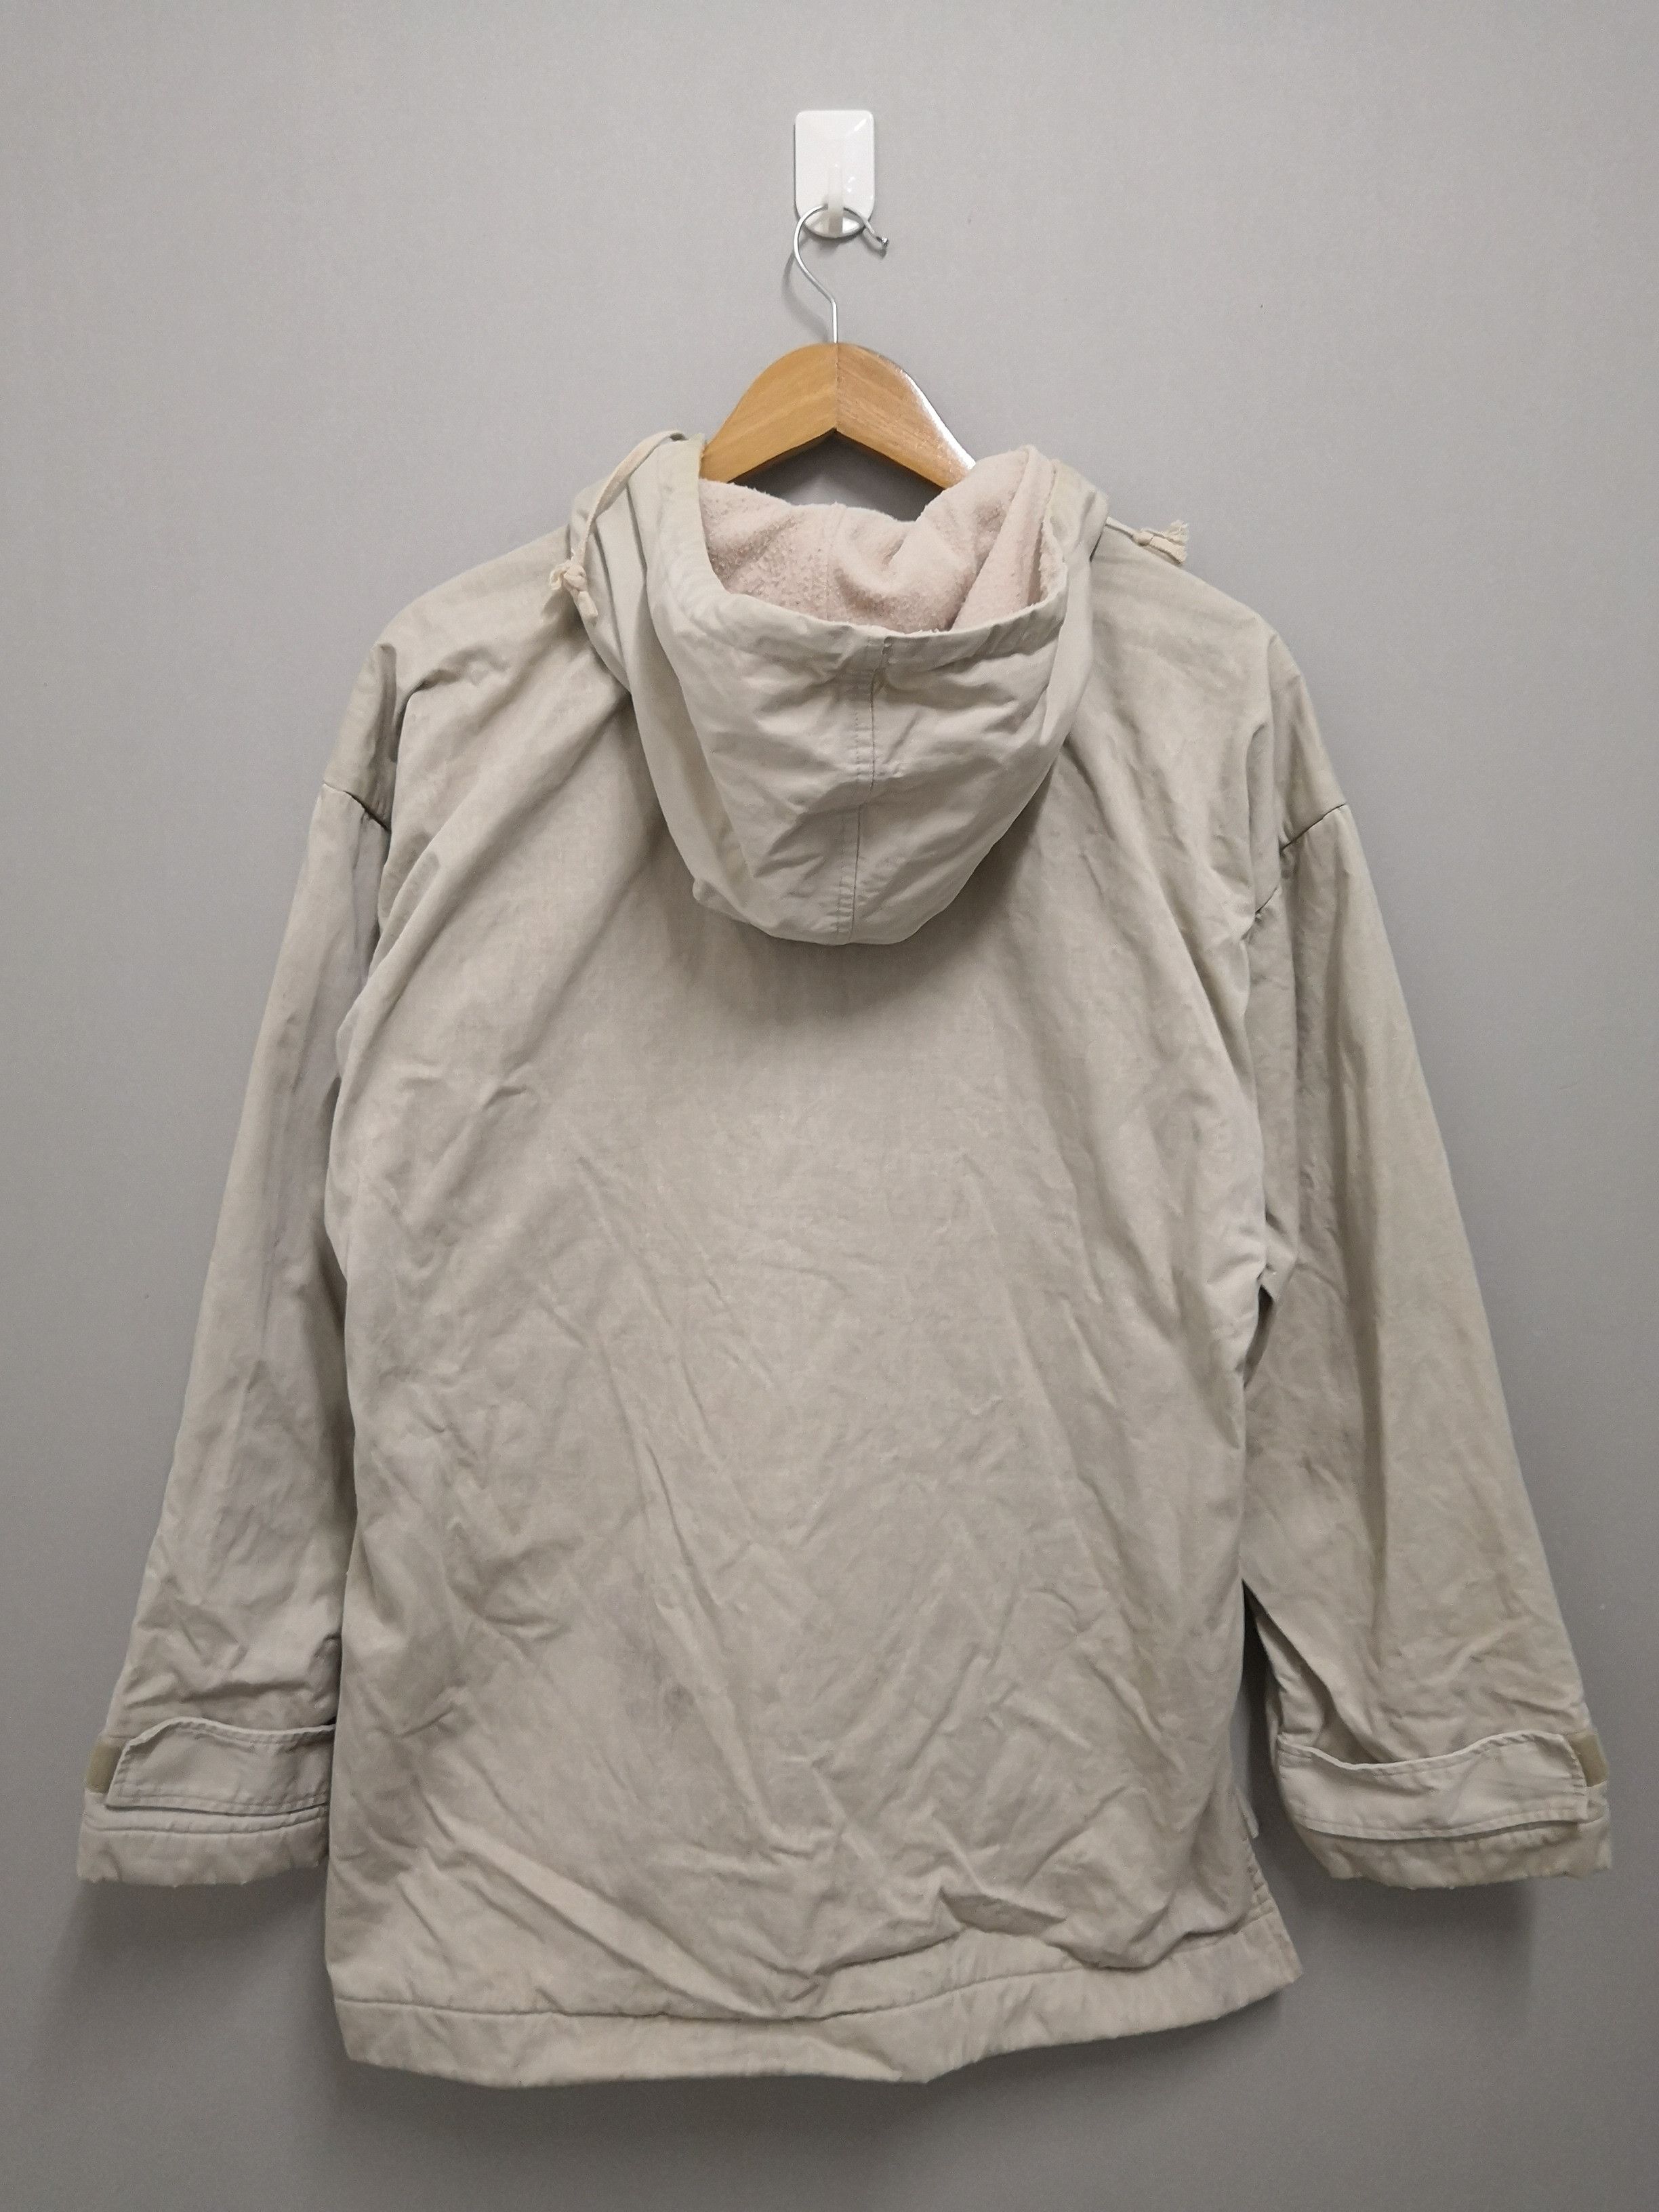 Issey Miyake - Zucca Year Of Climax 1999/2000 Hooded Jacket - 2